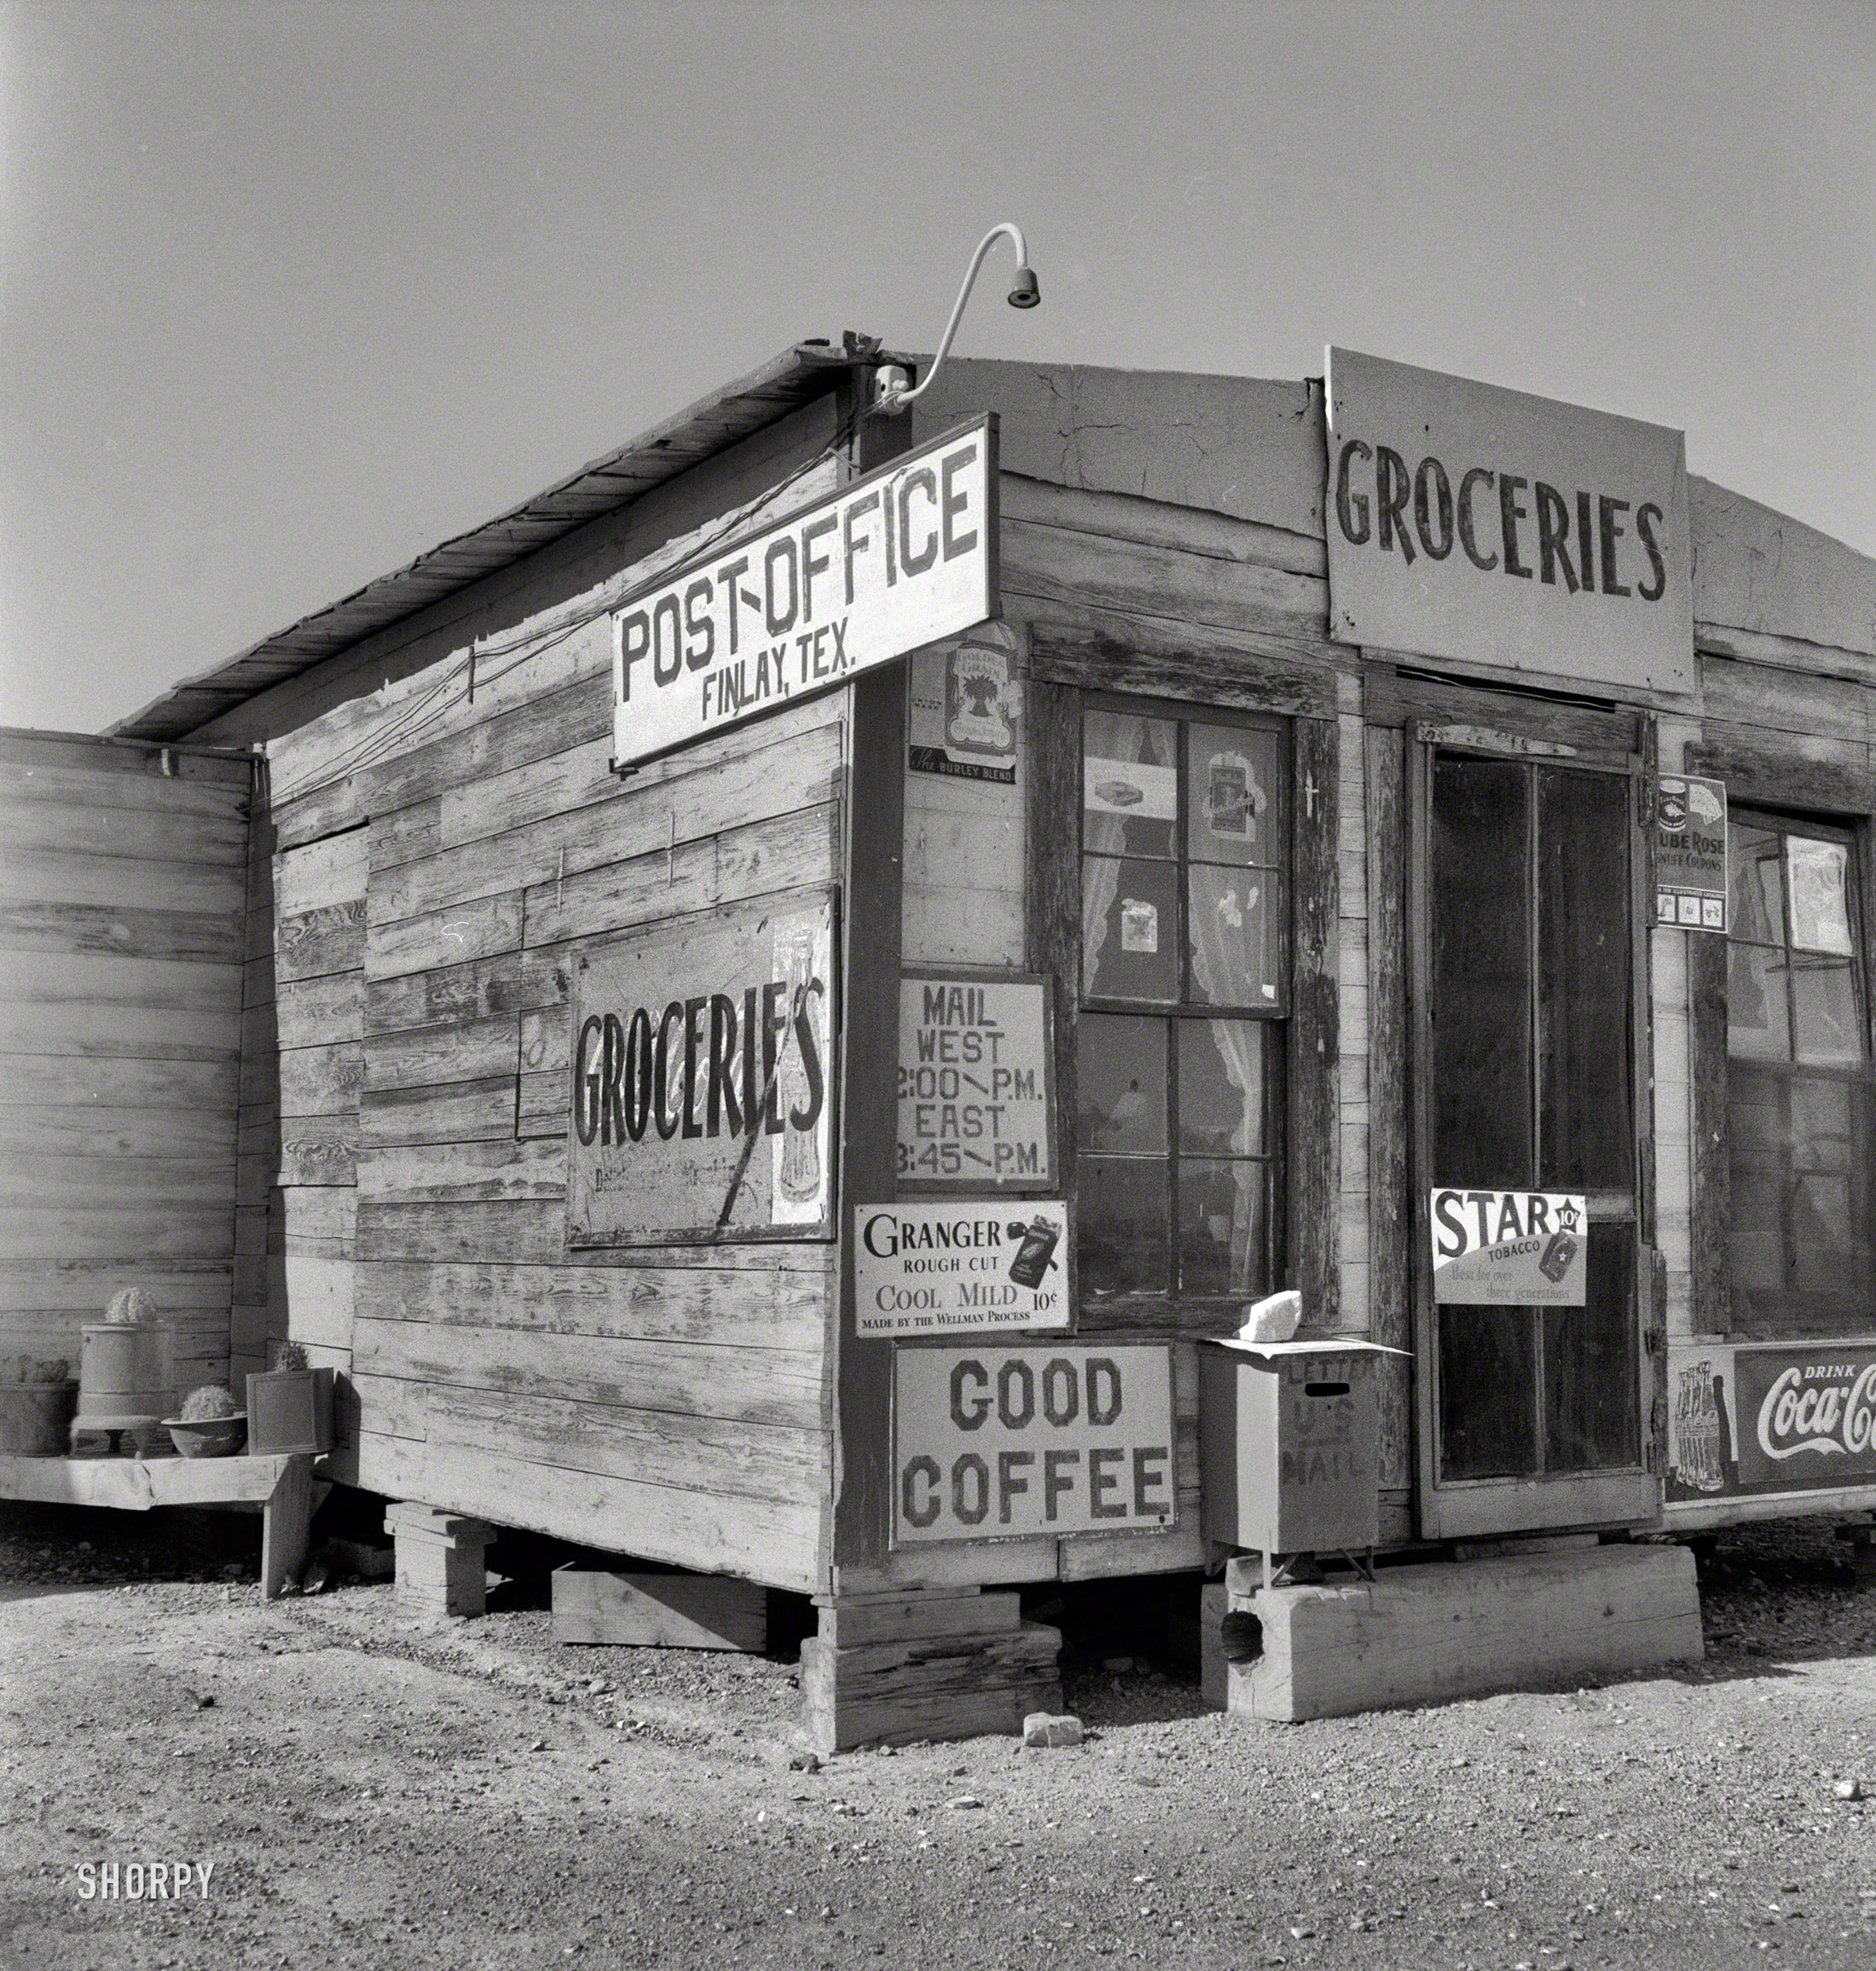 May 1937. "Post office. Finlay, Texas." Magazine, caffeine, nicotine -- all your basic ines. As well as potted cacti. Photo by Dorothea Lange. View full size.